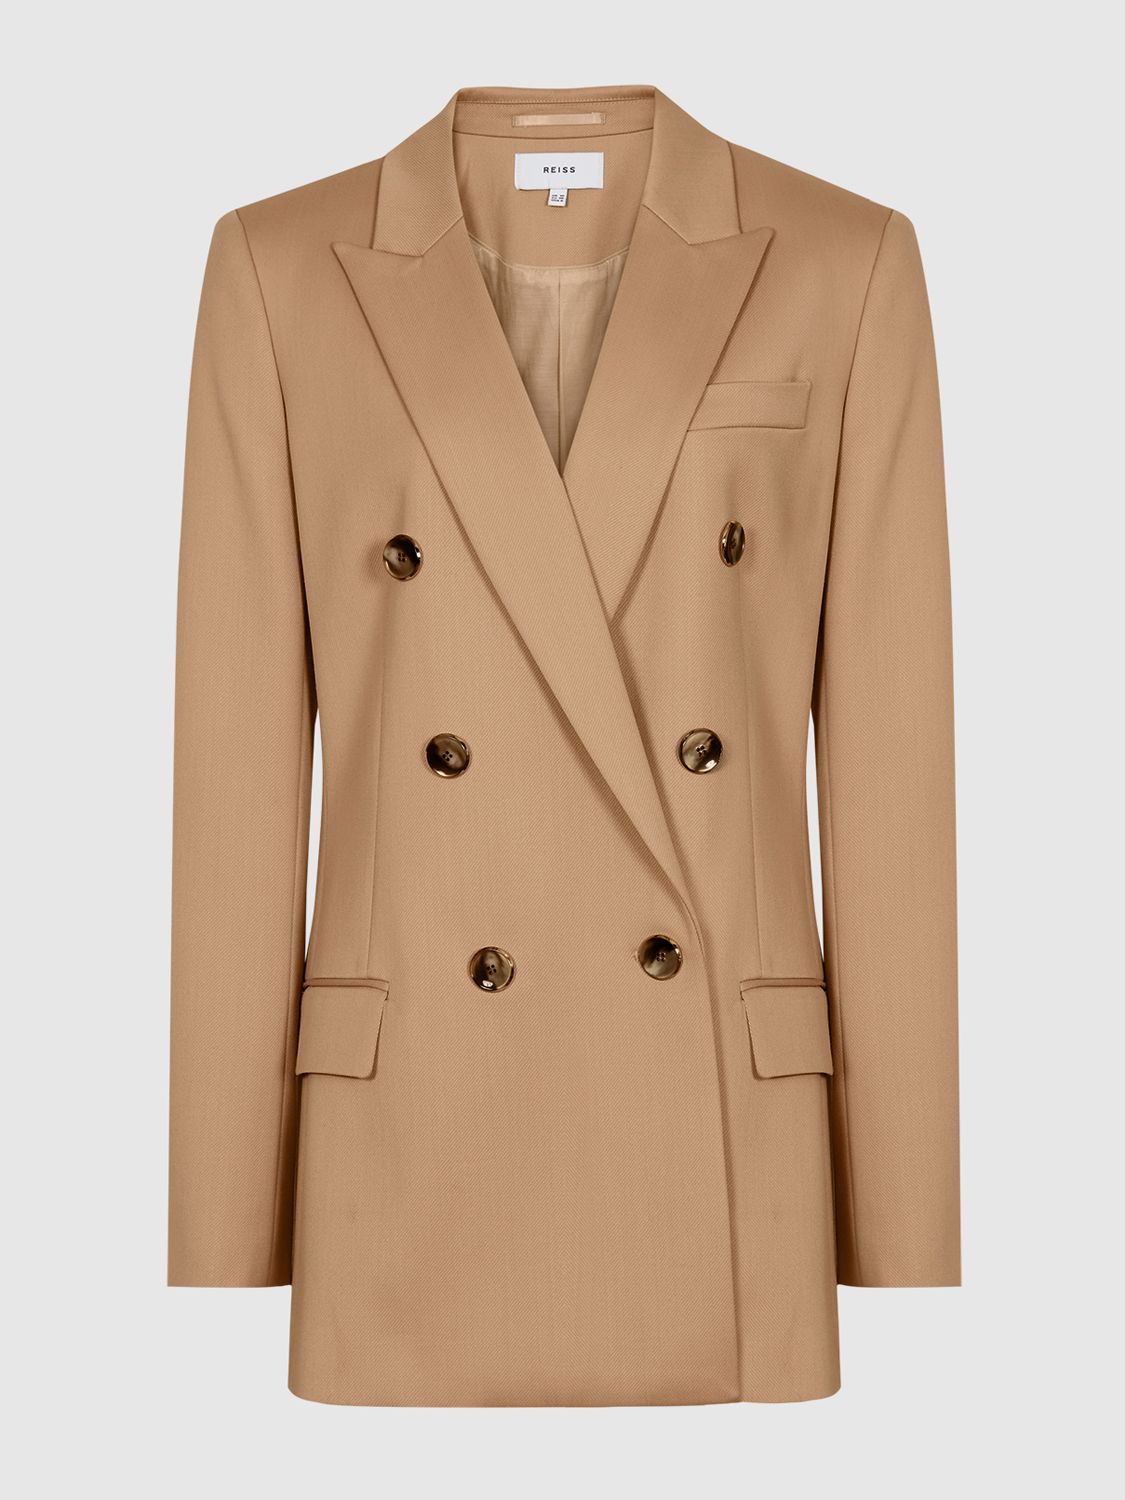 Reiss Larsson Double Breasted Blazer, Camel at John Lewis & Partners